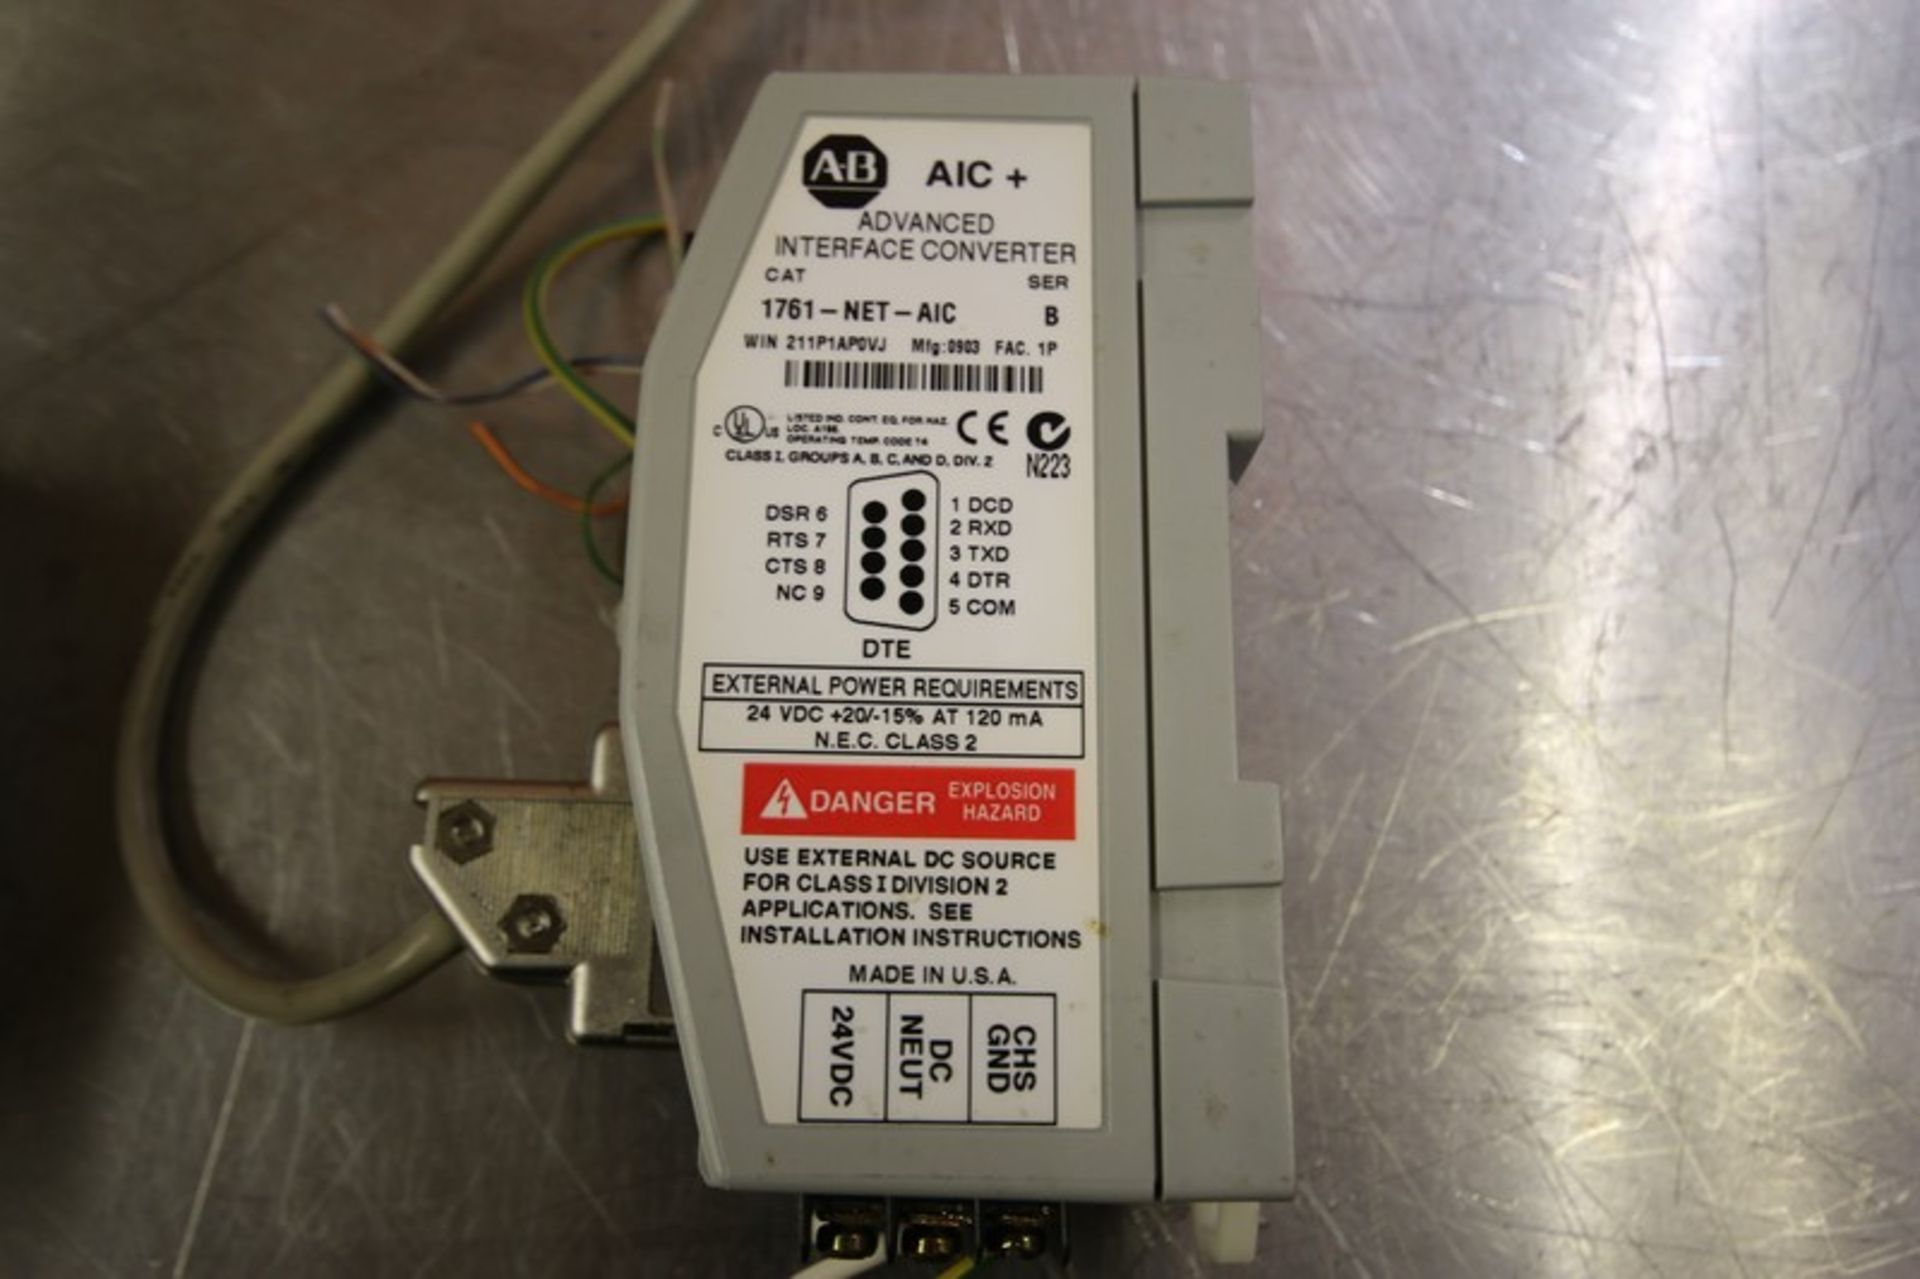 Allen Bradley Micro Logix 1500 PLC Controller Cat. No. 1769-ECR, Series A, with (6) Input & Outputs, - Image 5 of 5